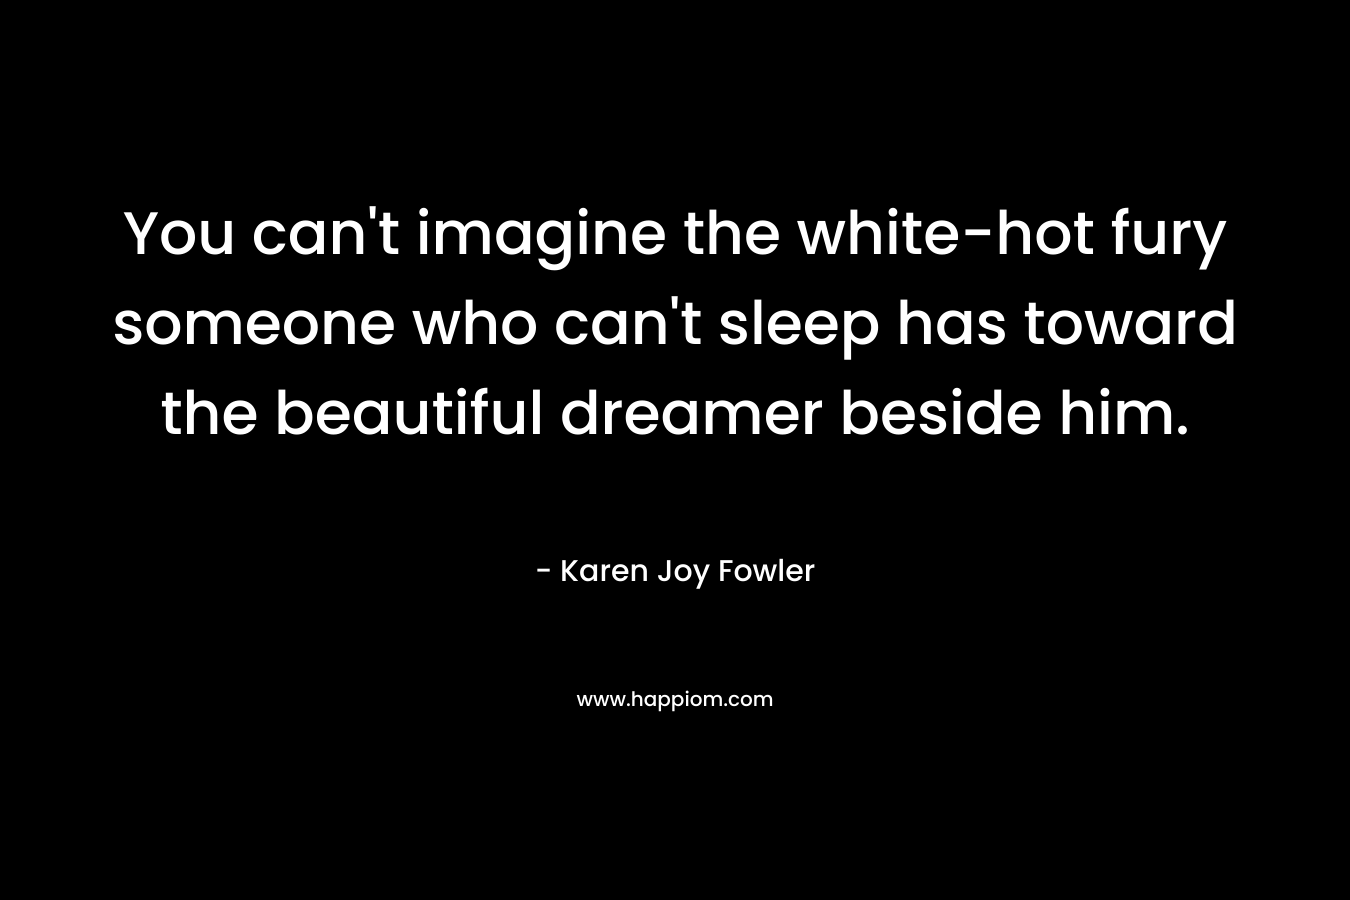 You can't imagine the white-hot fury someone who can't sleep has toward the beautiful dreamer beside him.